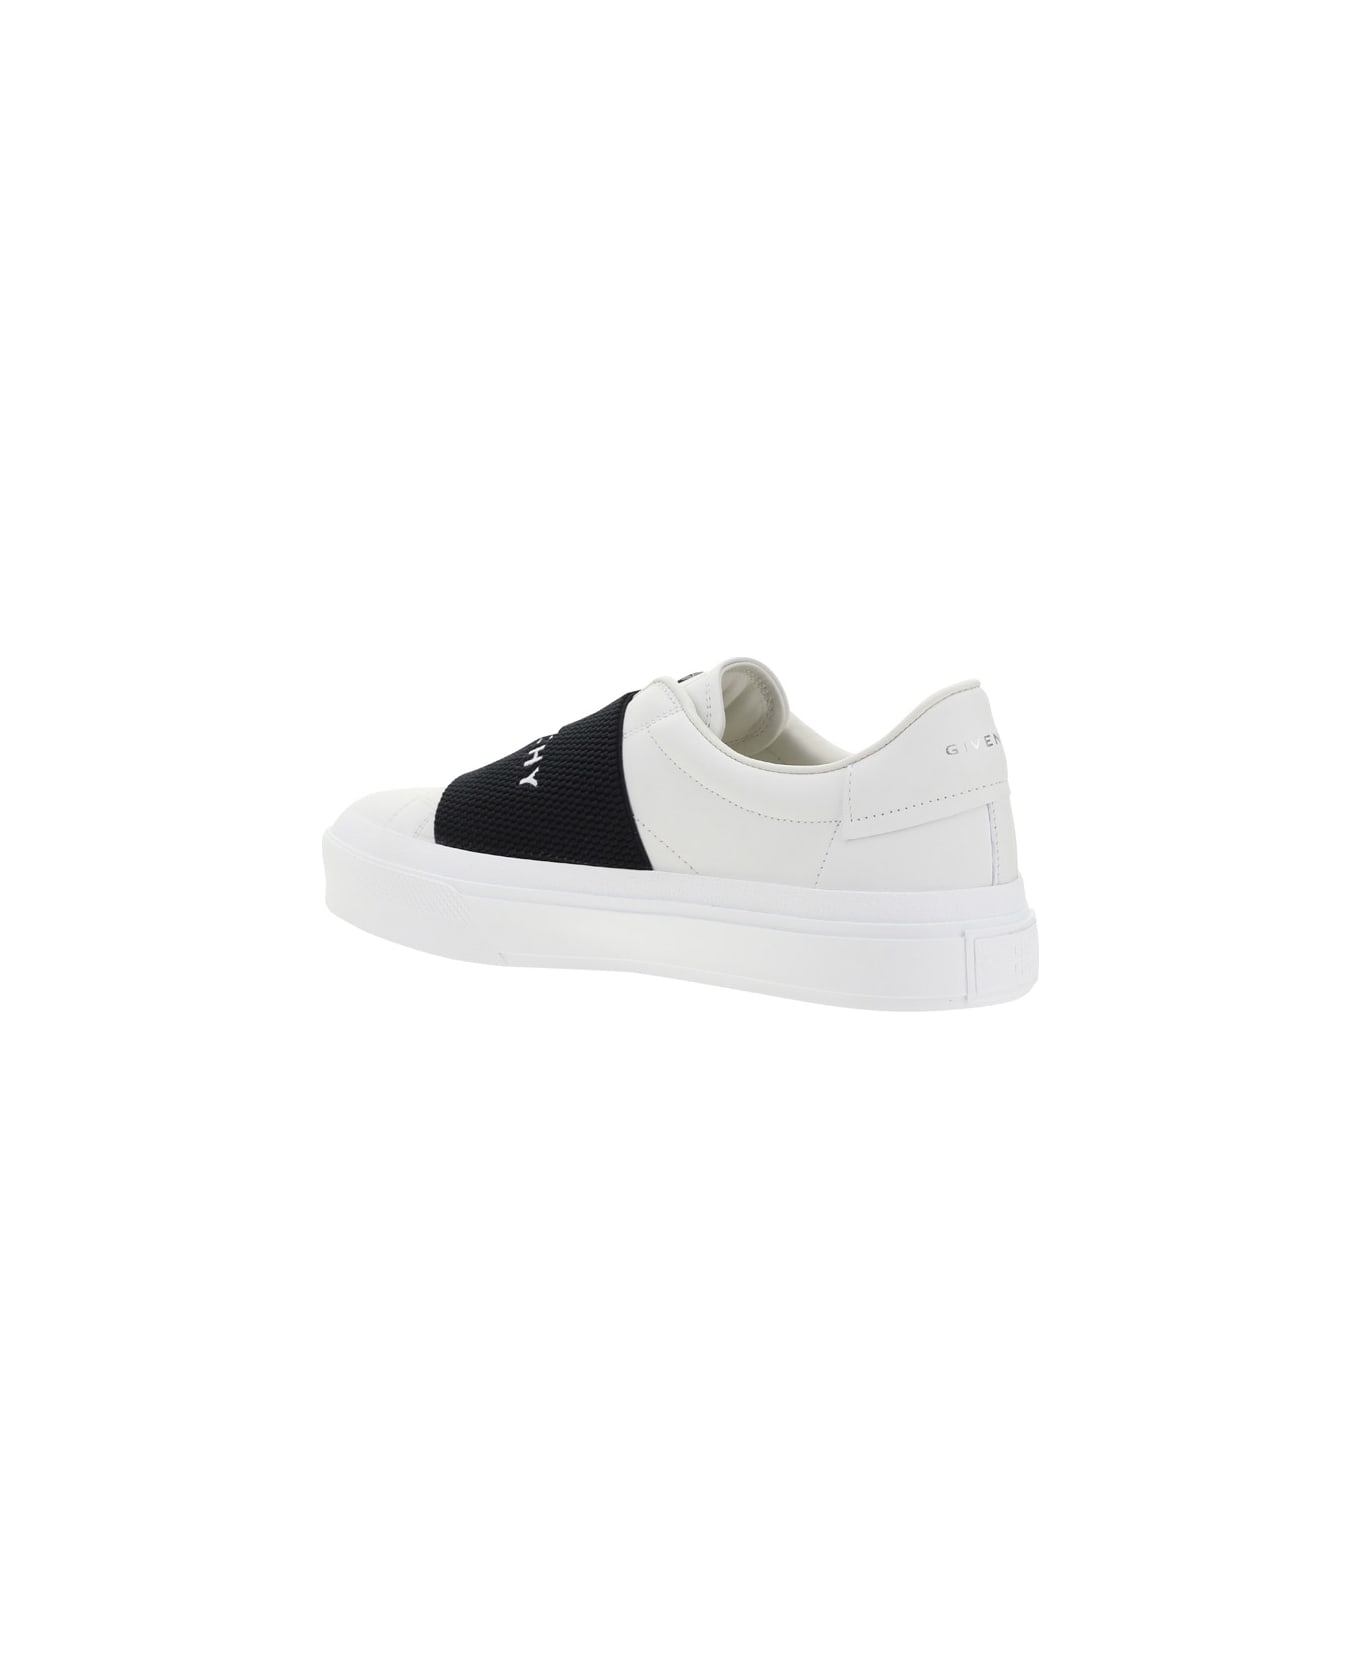 Givenchy City Sport Sneakers - White スニーカー